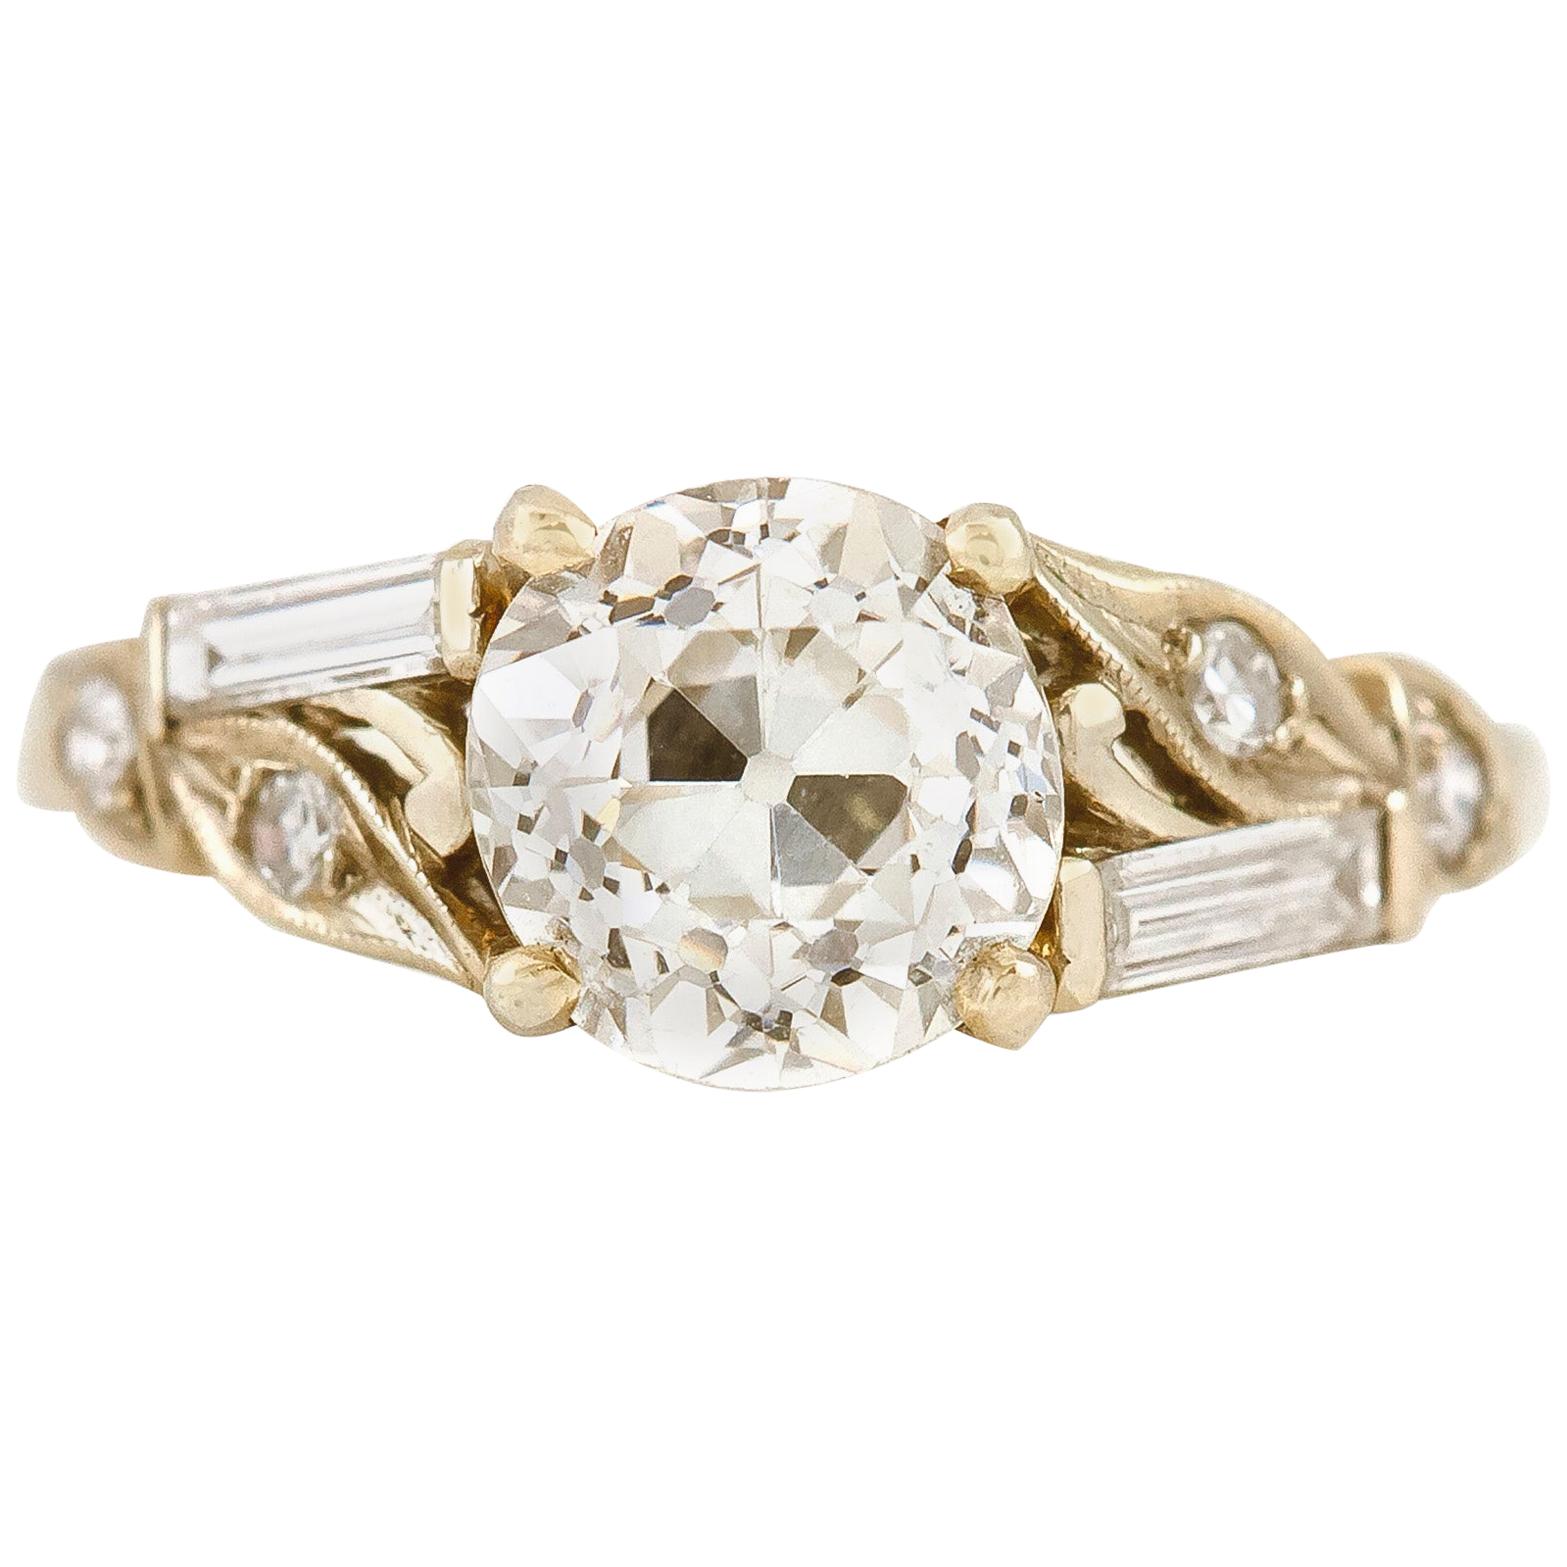 1920s-1930s Engagement Ring